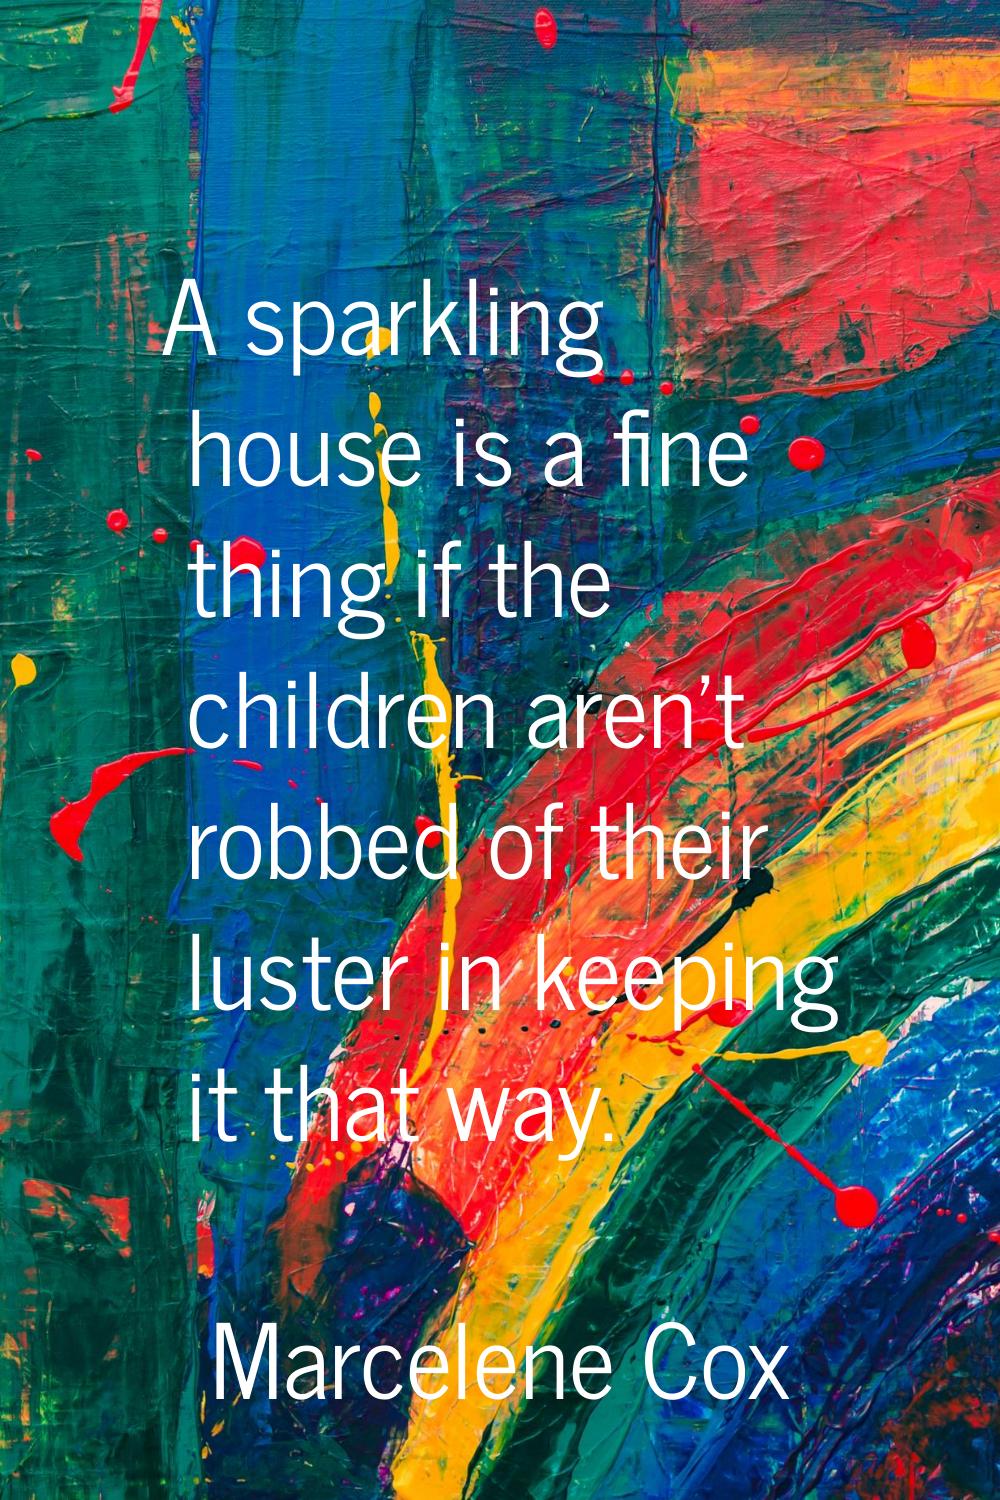 A sparkling house is a fine thing if the children aren't robbed of their luster in keeping it that 